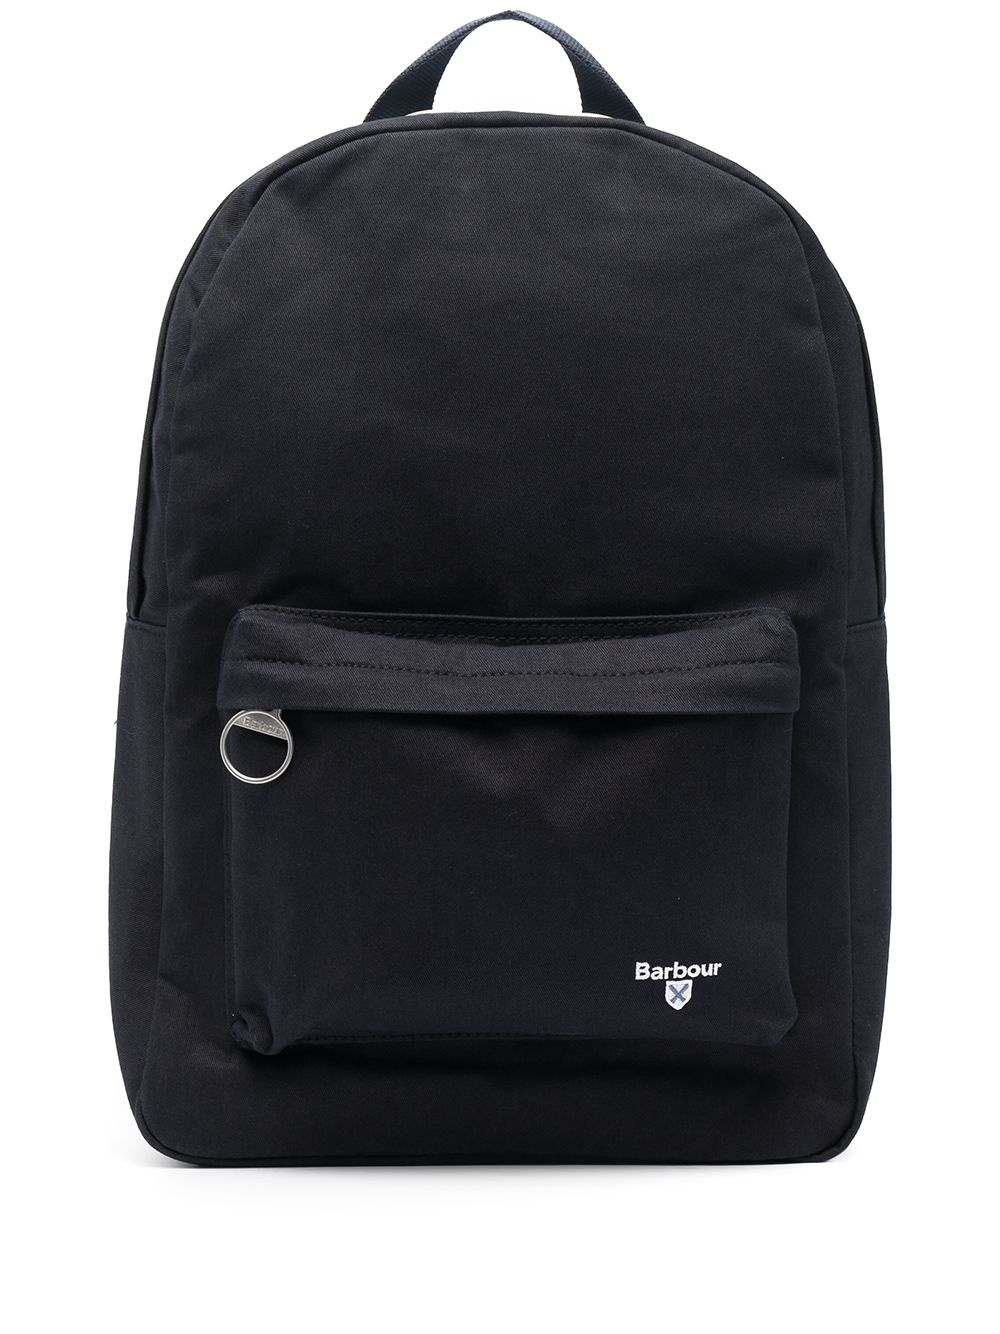 Cotton backpack - 1